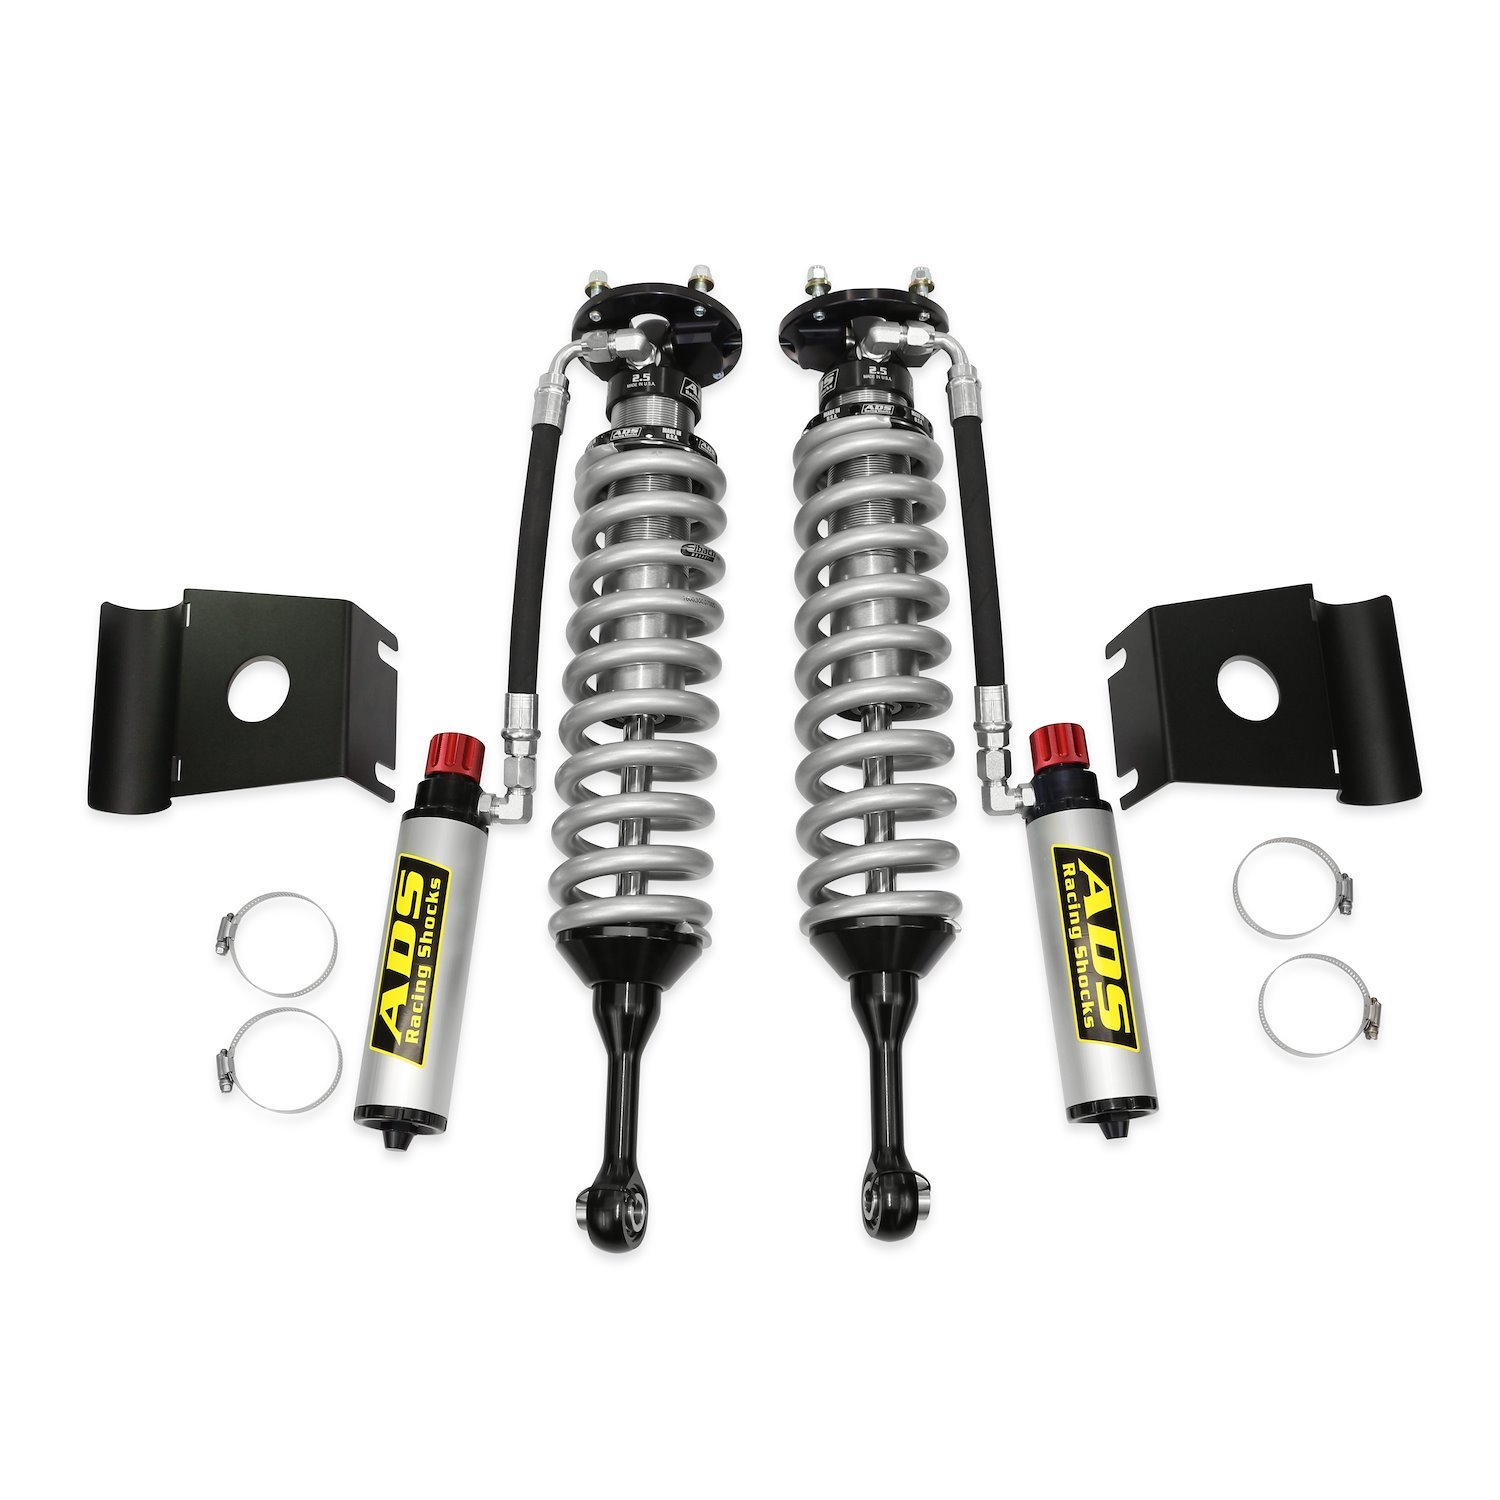 250-TN077-A00 Racing Bolt-On Shocks, Fits Select Toyota Tundra, 2.5 in., 4 in. Lift, w/ Clicker Reservoir